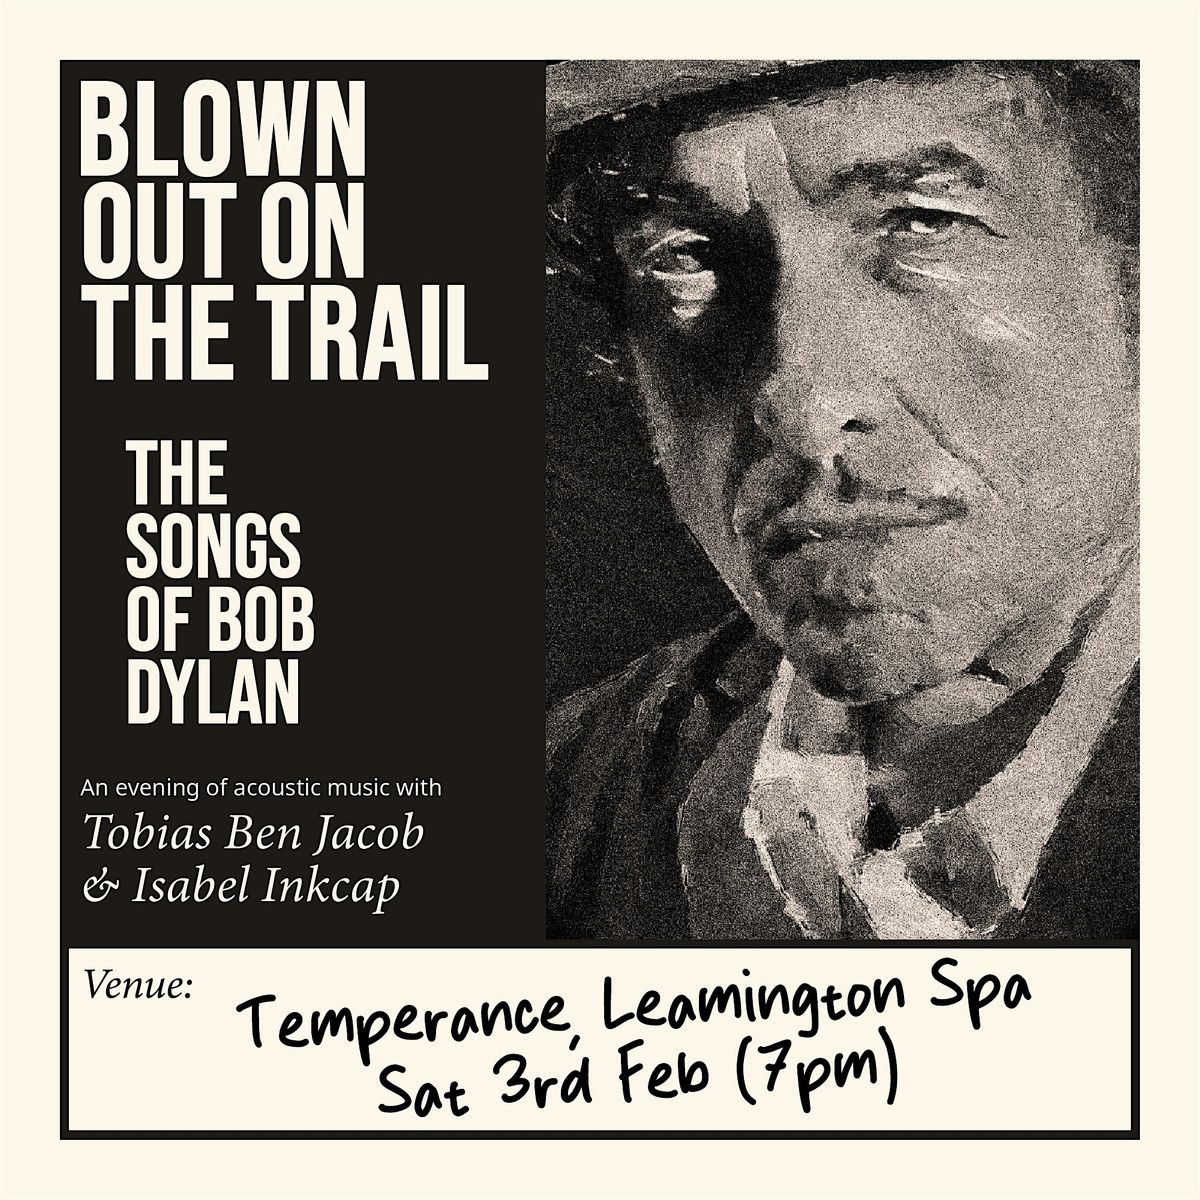 Blown out on the Trail - The Songs of Bob Dylan